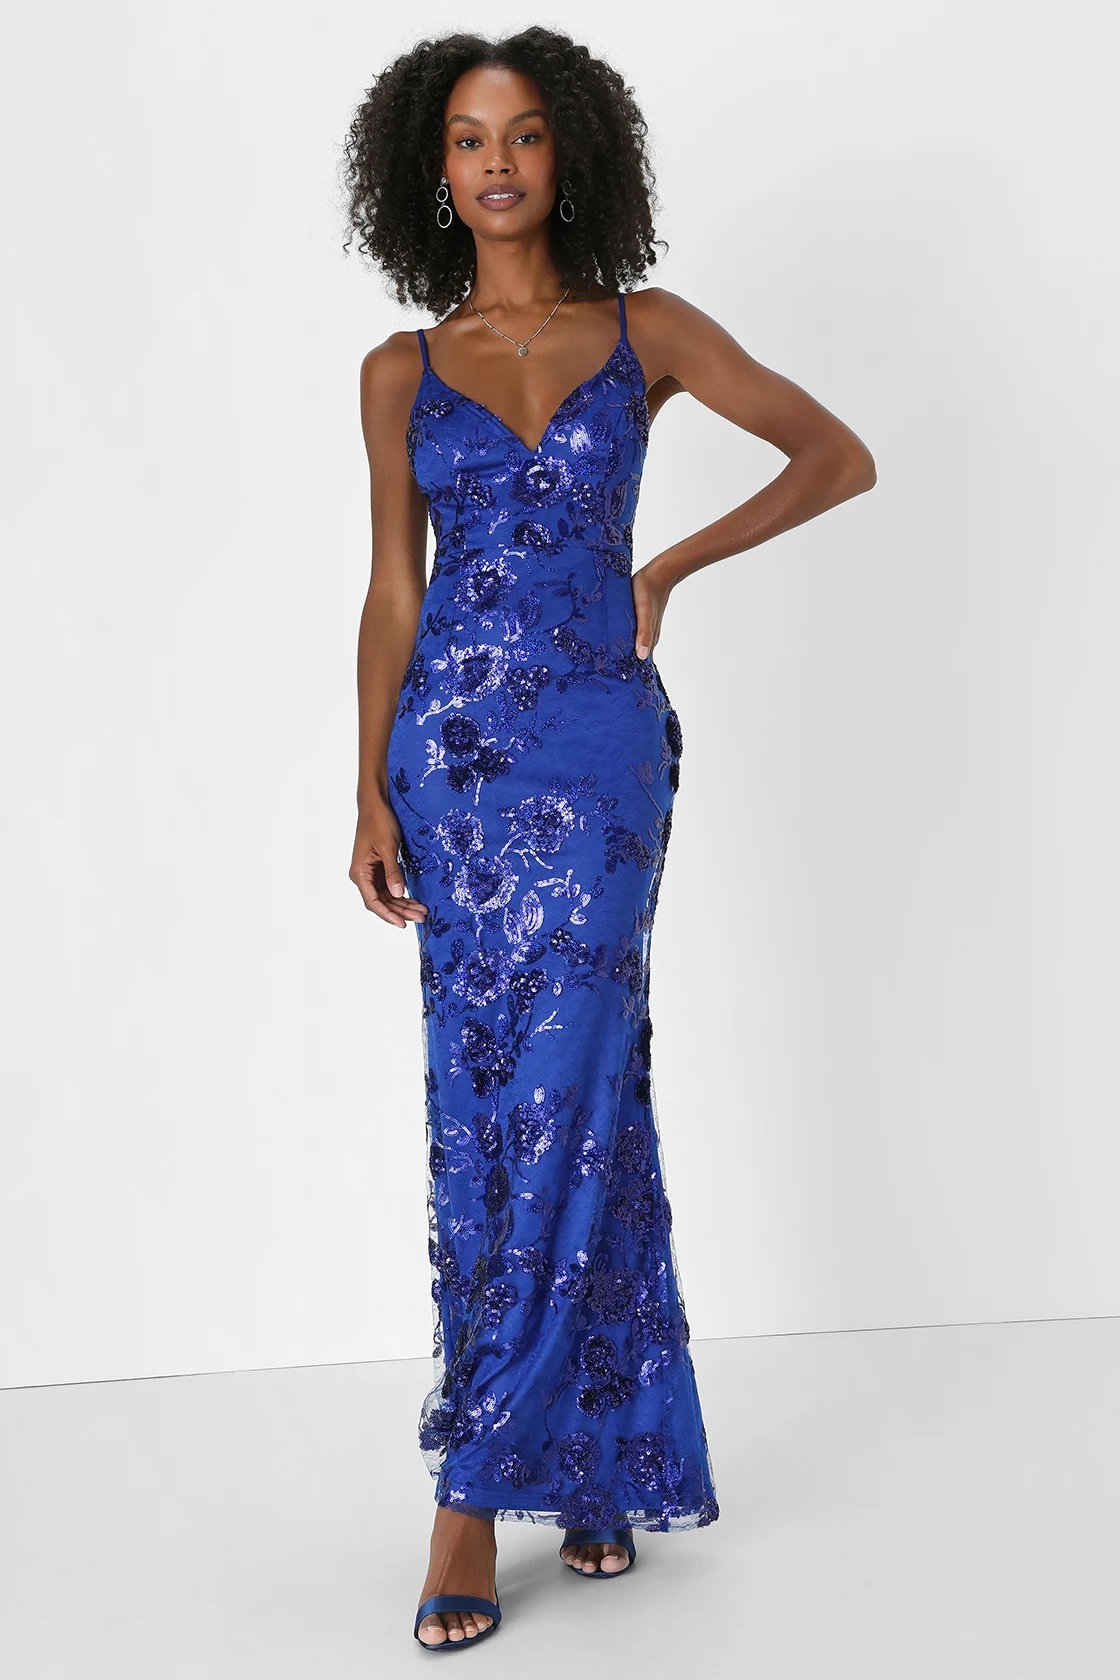 15 Prom Dresses To Snag Before The Big Day